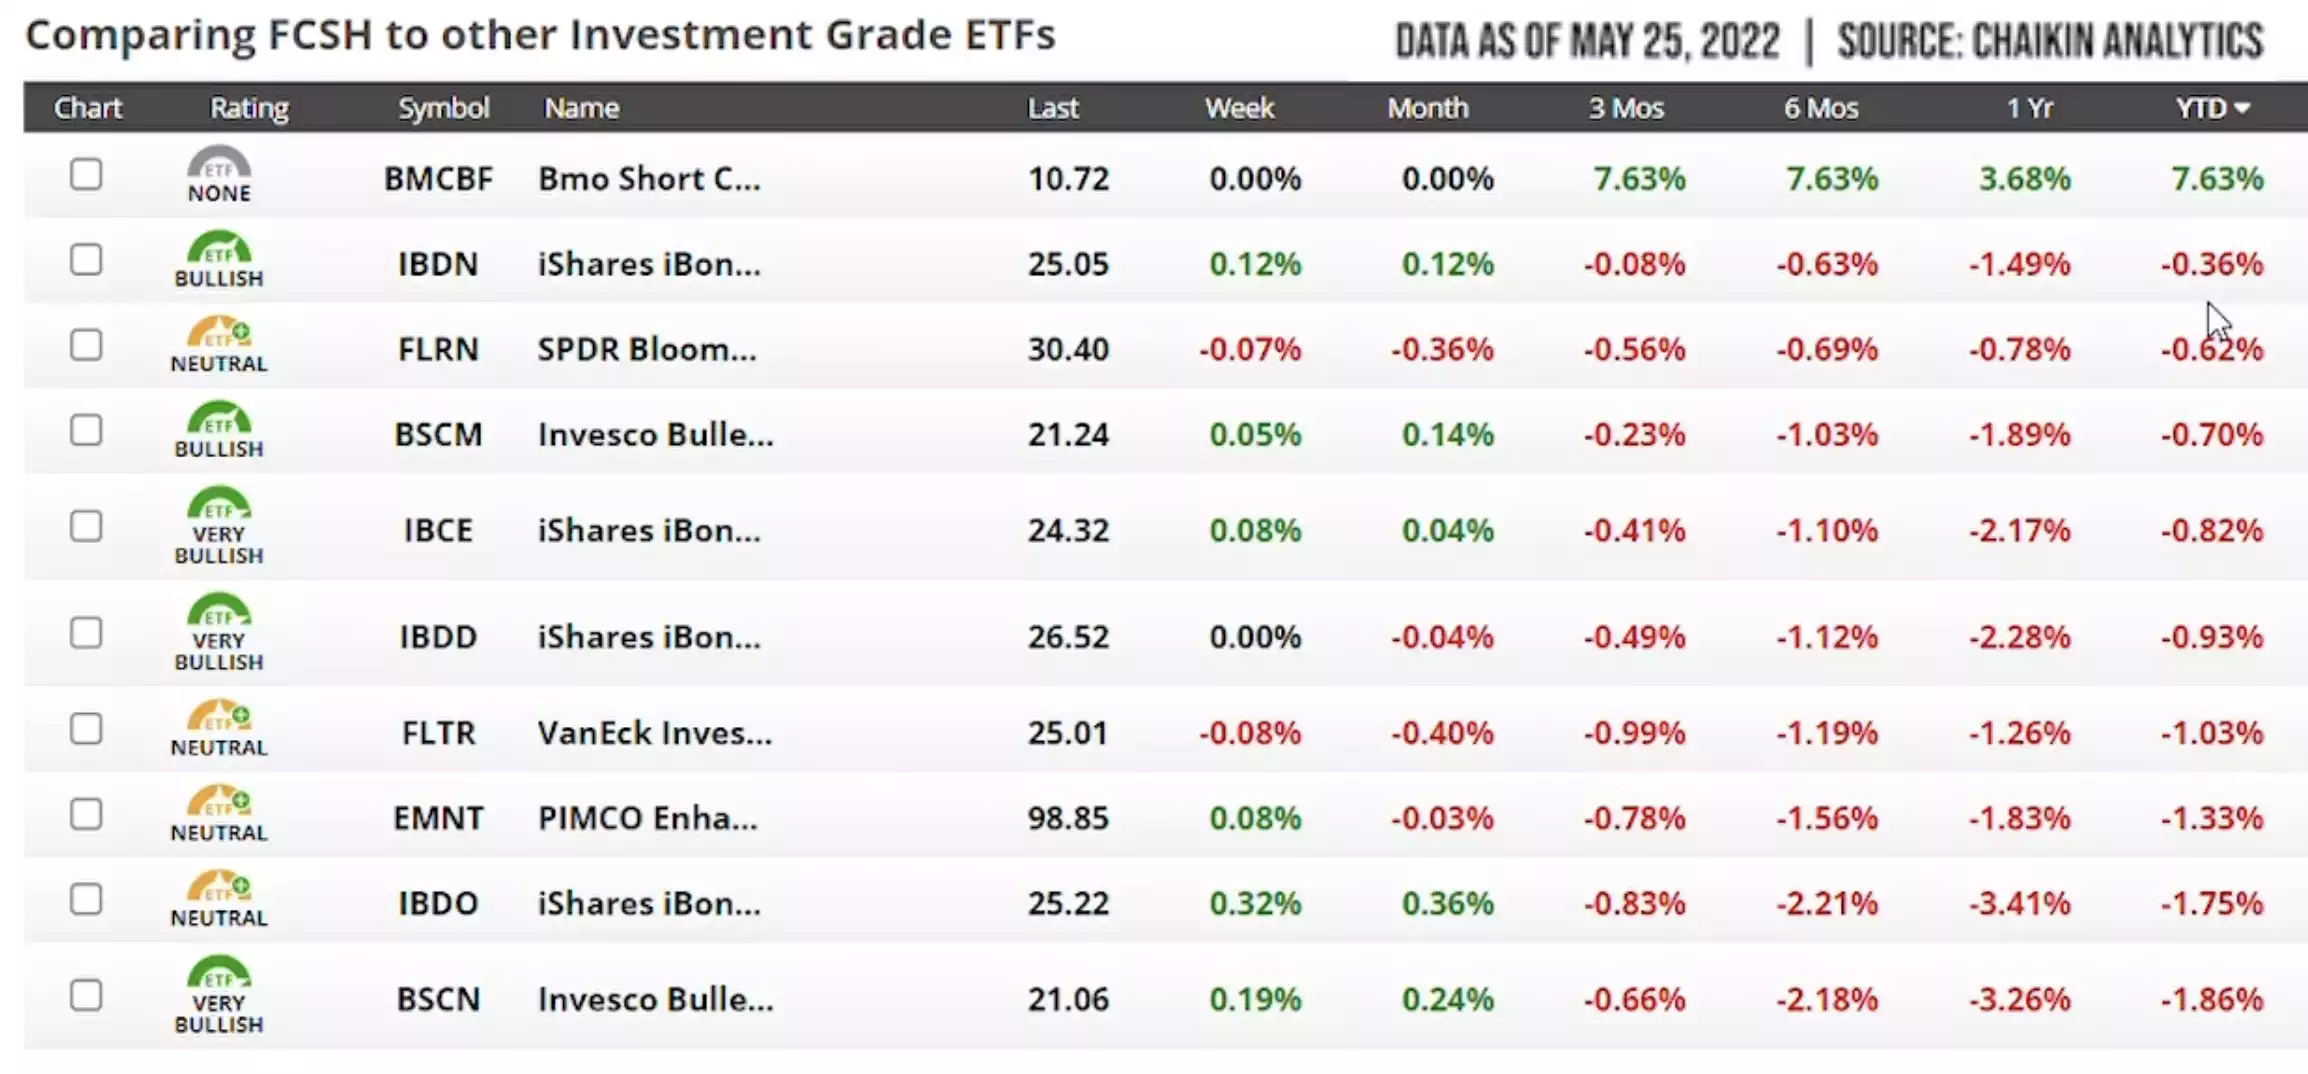 Halftime Report - Comparing FCSH to Other Investment Grade ETFs